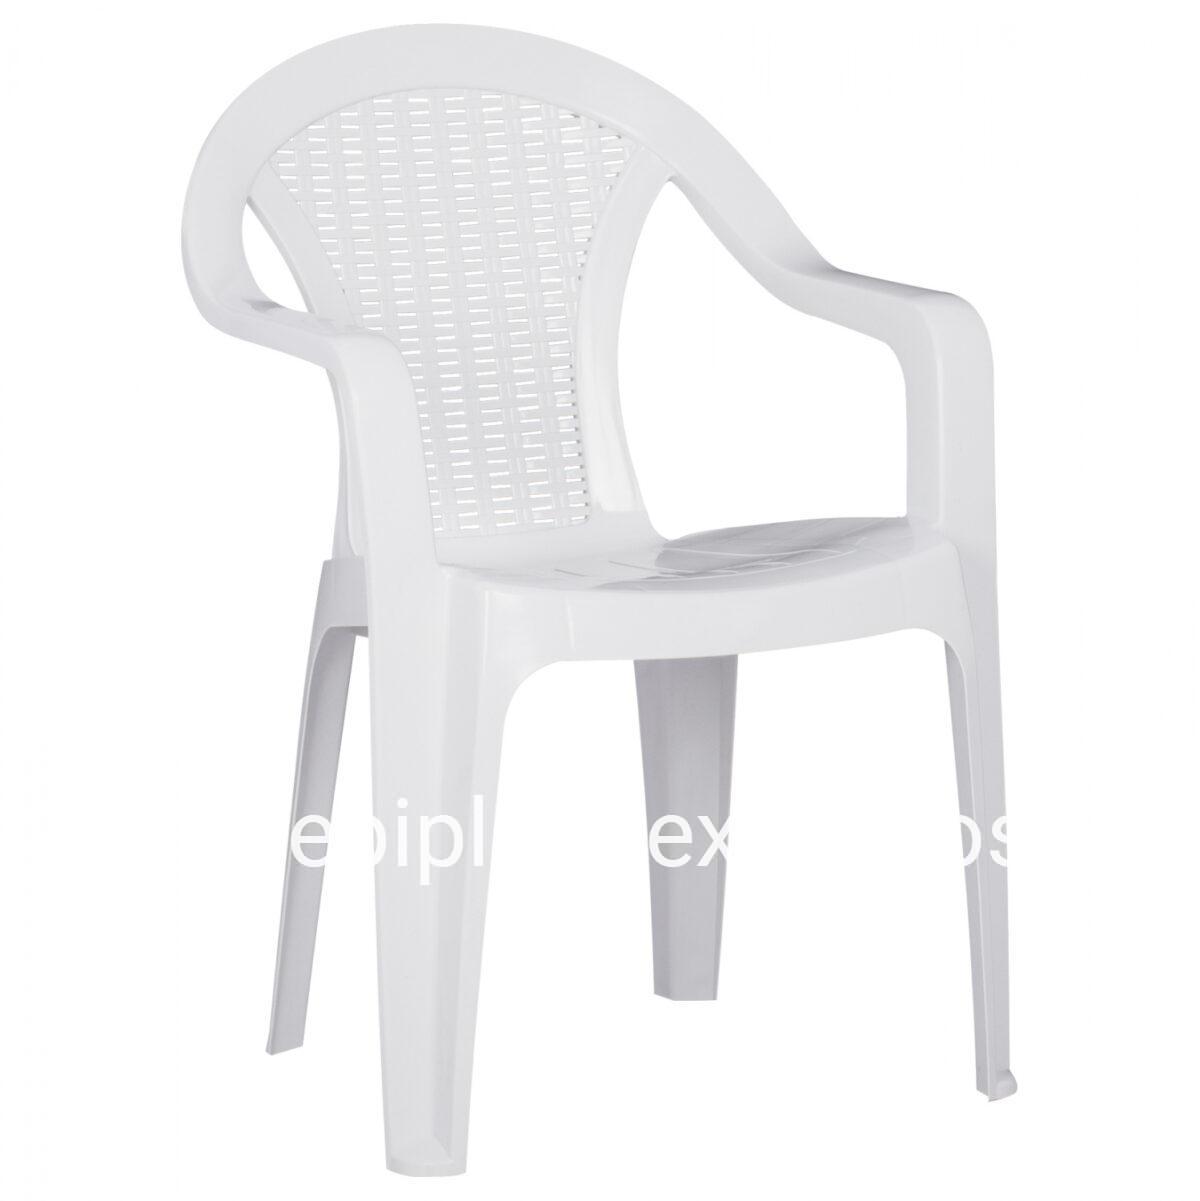 POLYPROPYLENE ARMCHAIR WHITE WITH ARMS HM5822.01 56x42x78